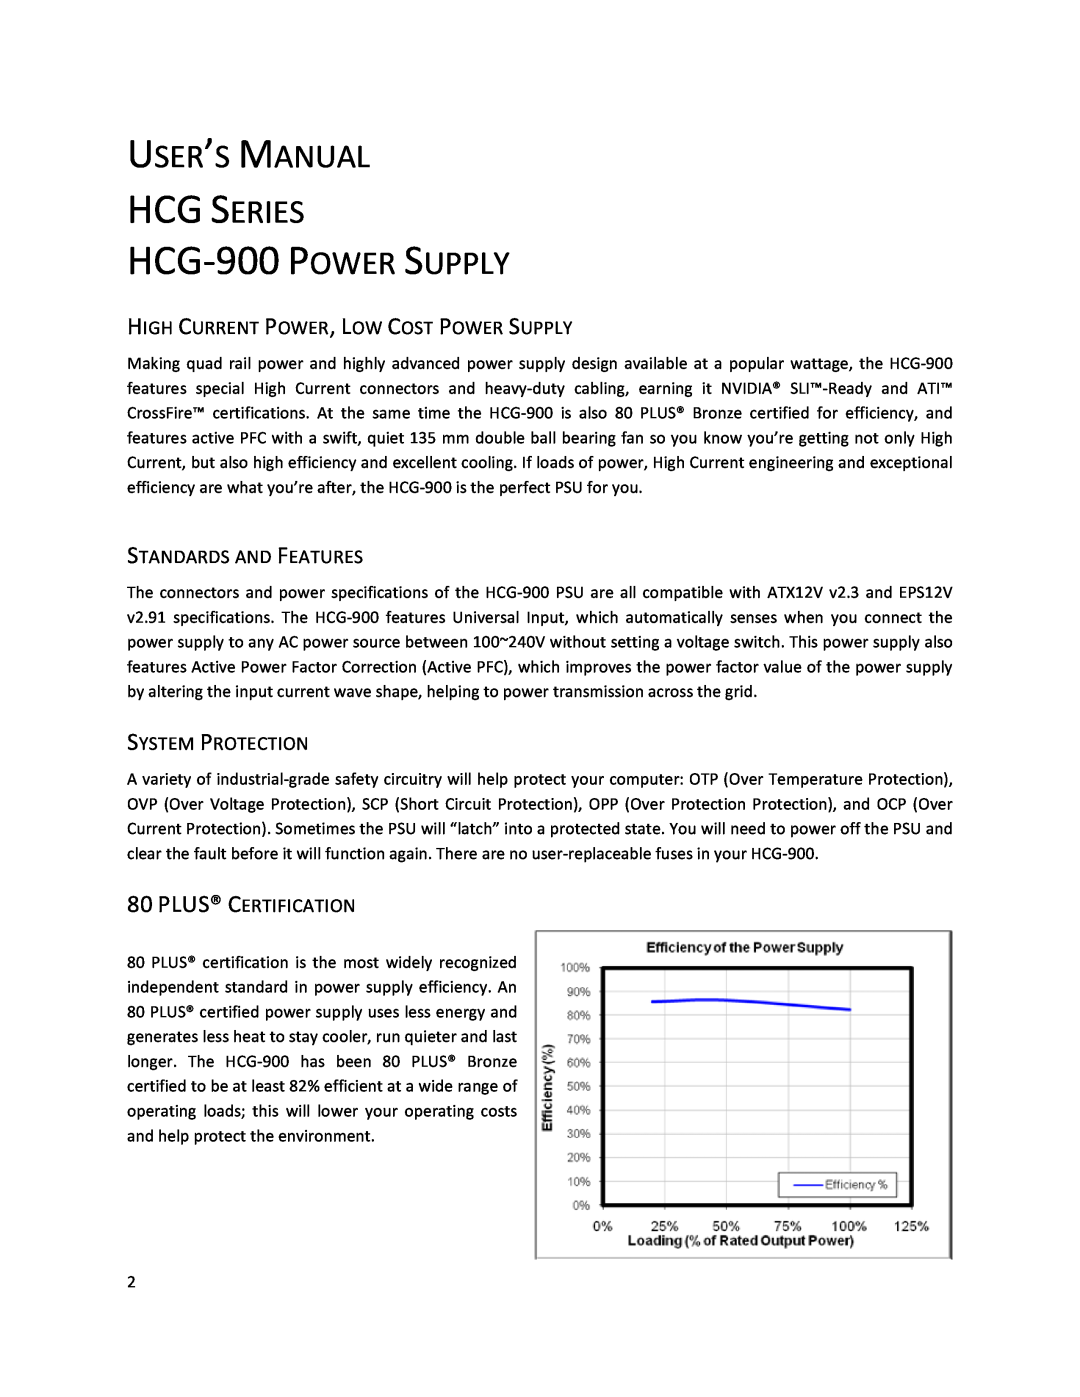 Antec HCG SERIES HCG-900 POWER SUPPLY, High Current Power, Low Cost Power Supply, Standards And Features, User’S Manual 